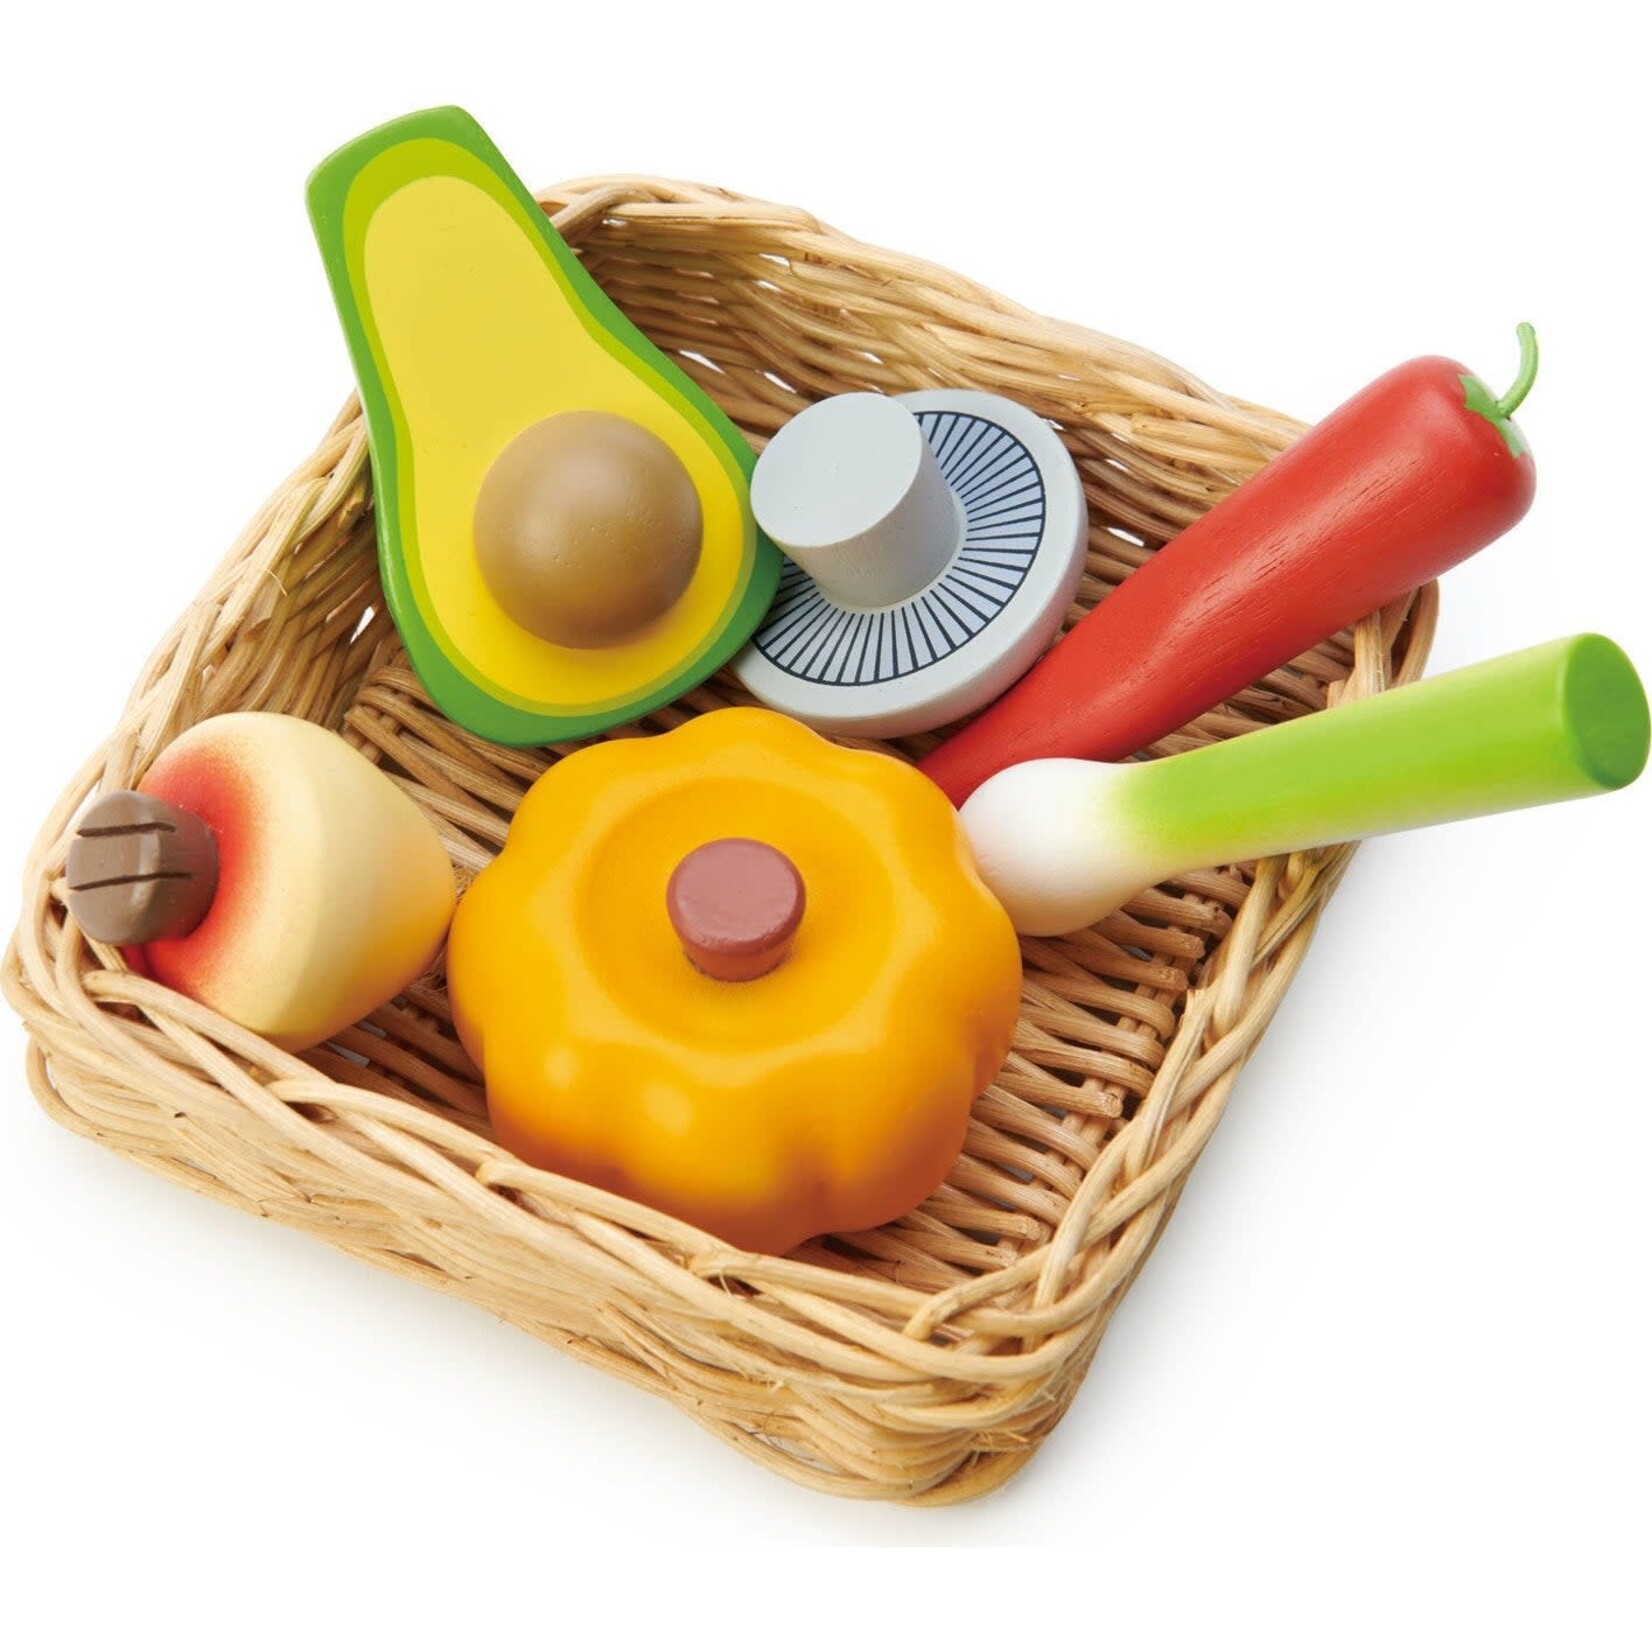 Plush Veggie Basket Play Set with Interactive Stuffed Vegetable Toys –  Lambs & Ivy